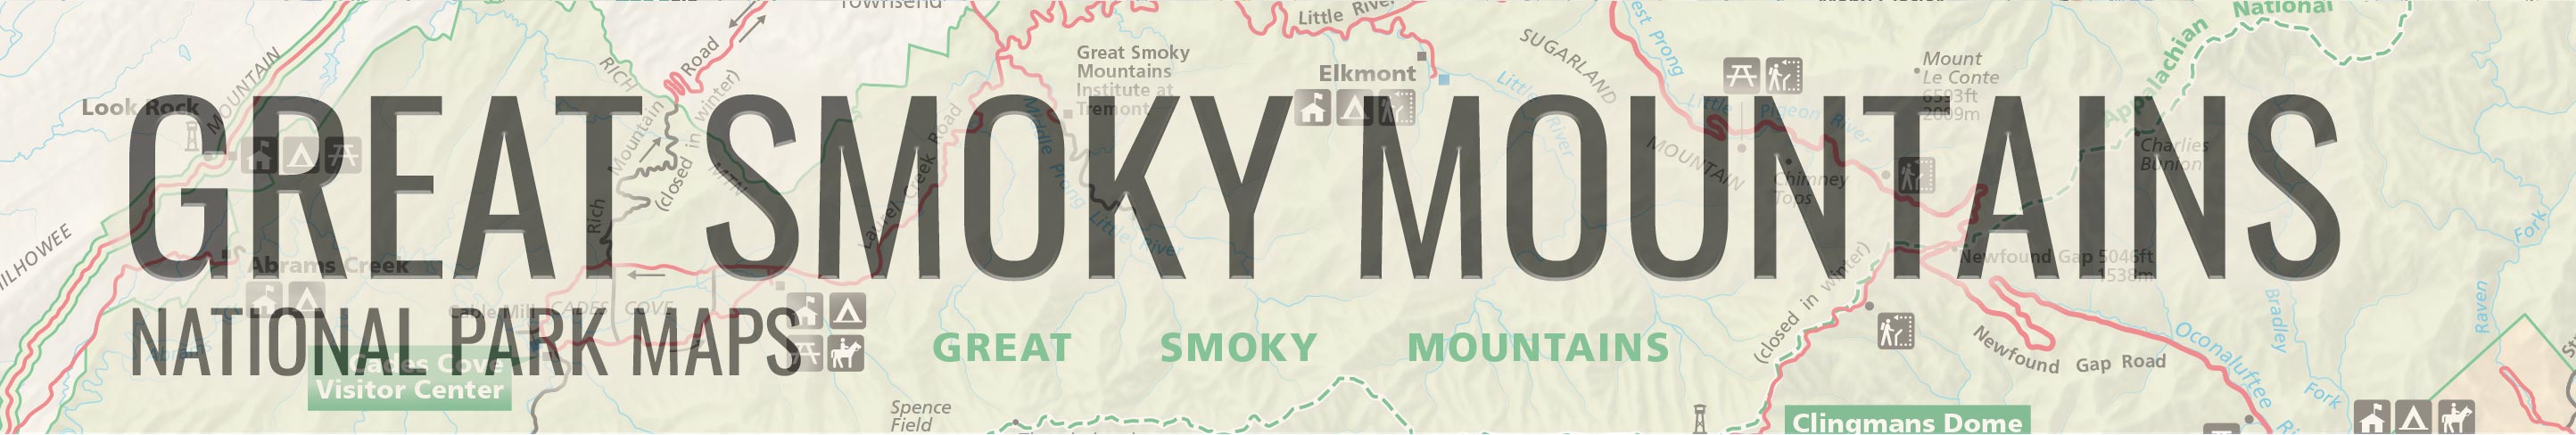 great-smoky-mountains-national-park-maps-header